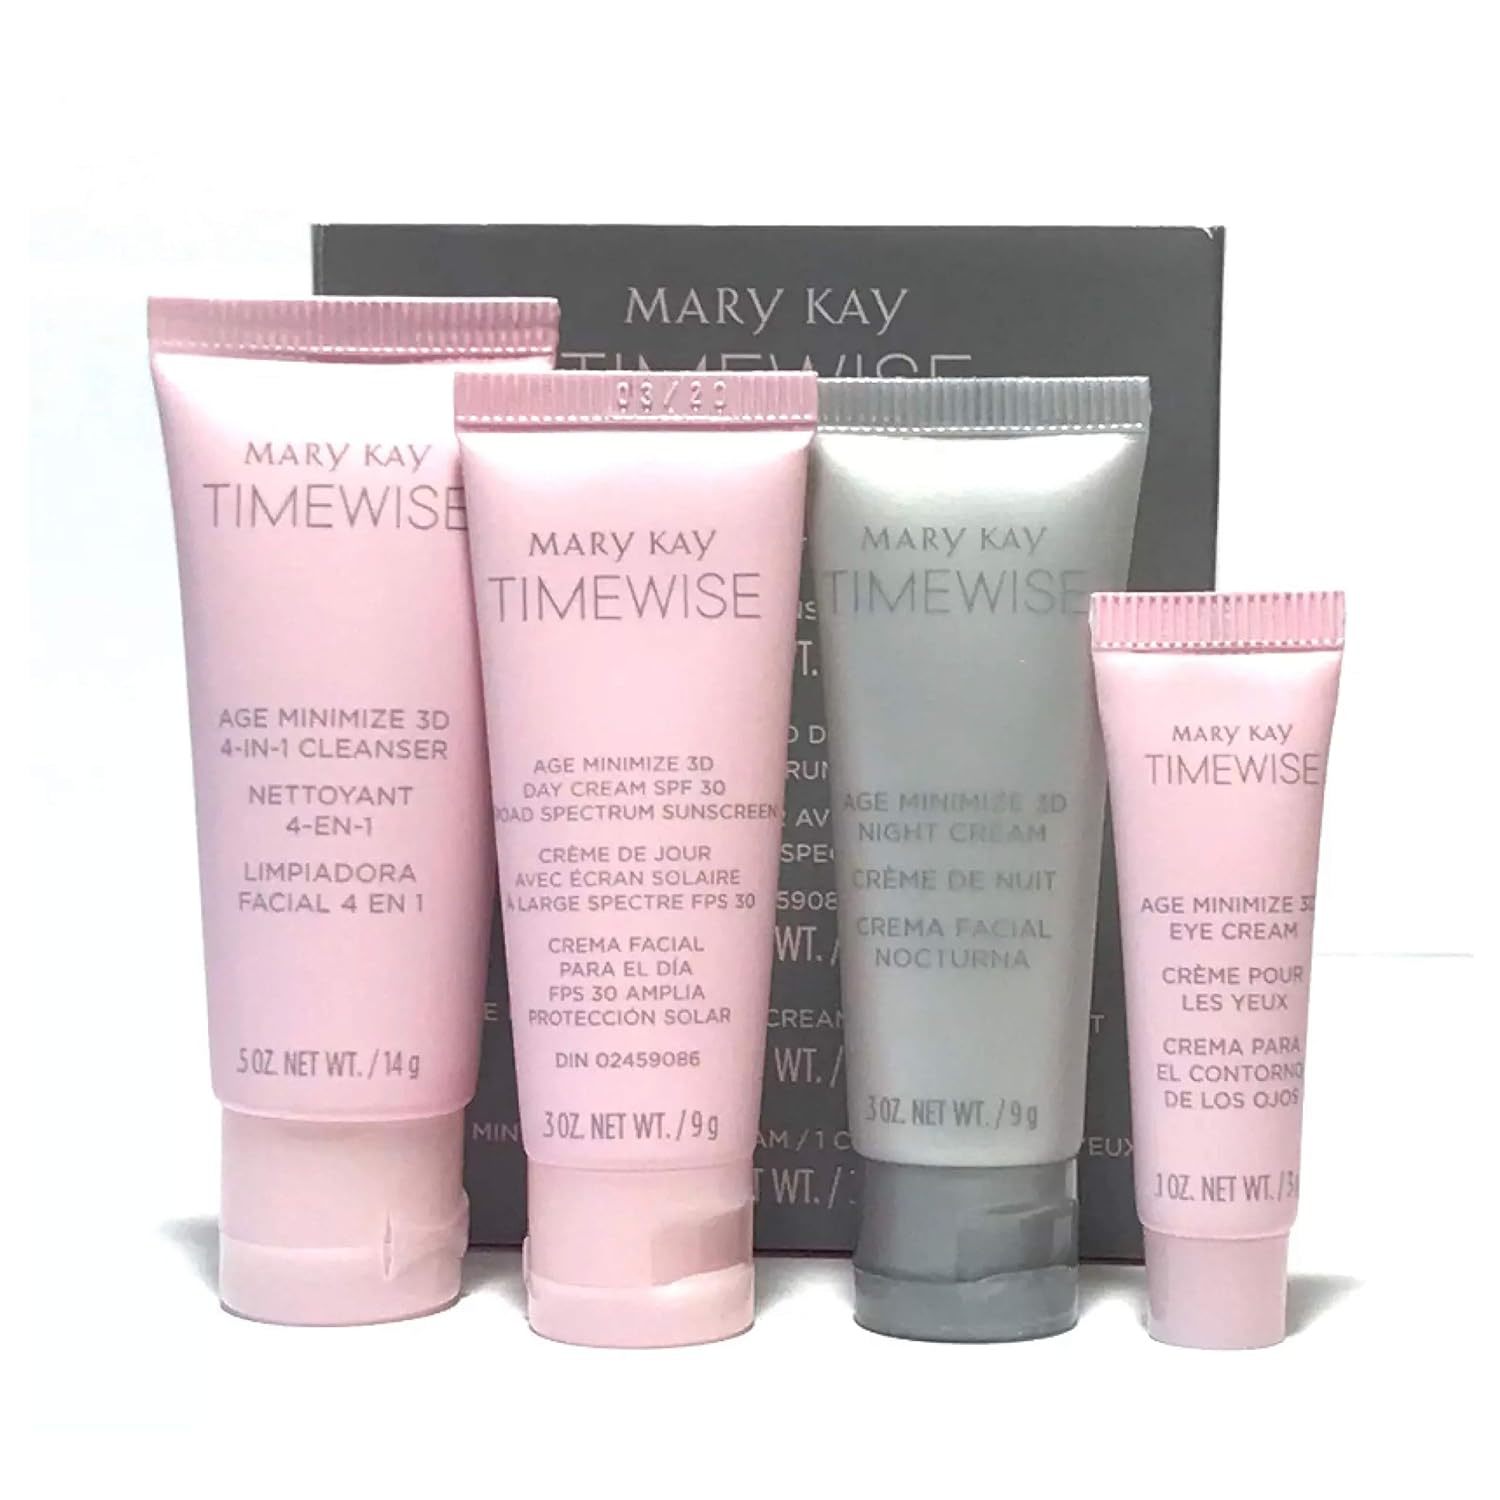 Mary Kay TimeWise Age Minimize Ultimate 3D Miracle Gift Set - Combination Oily S - $45.99